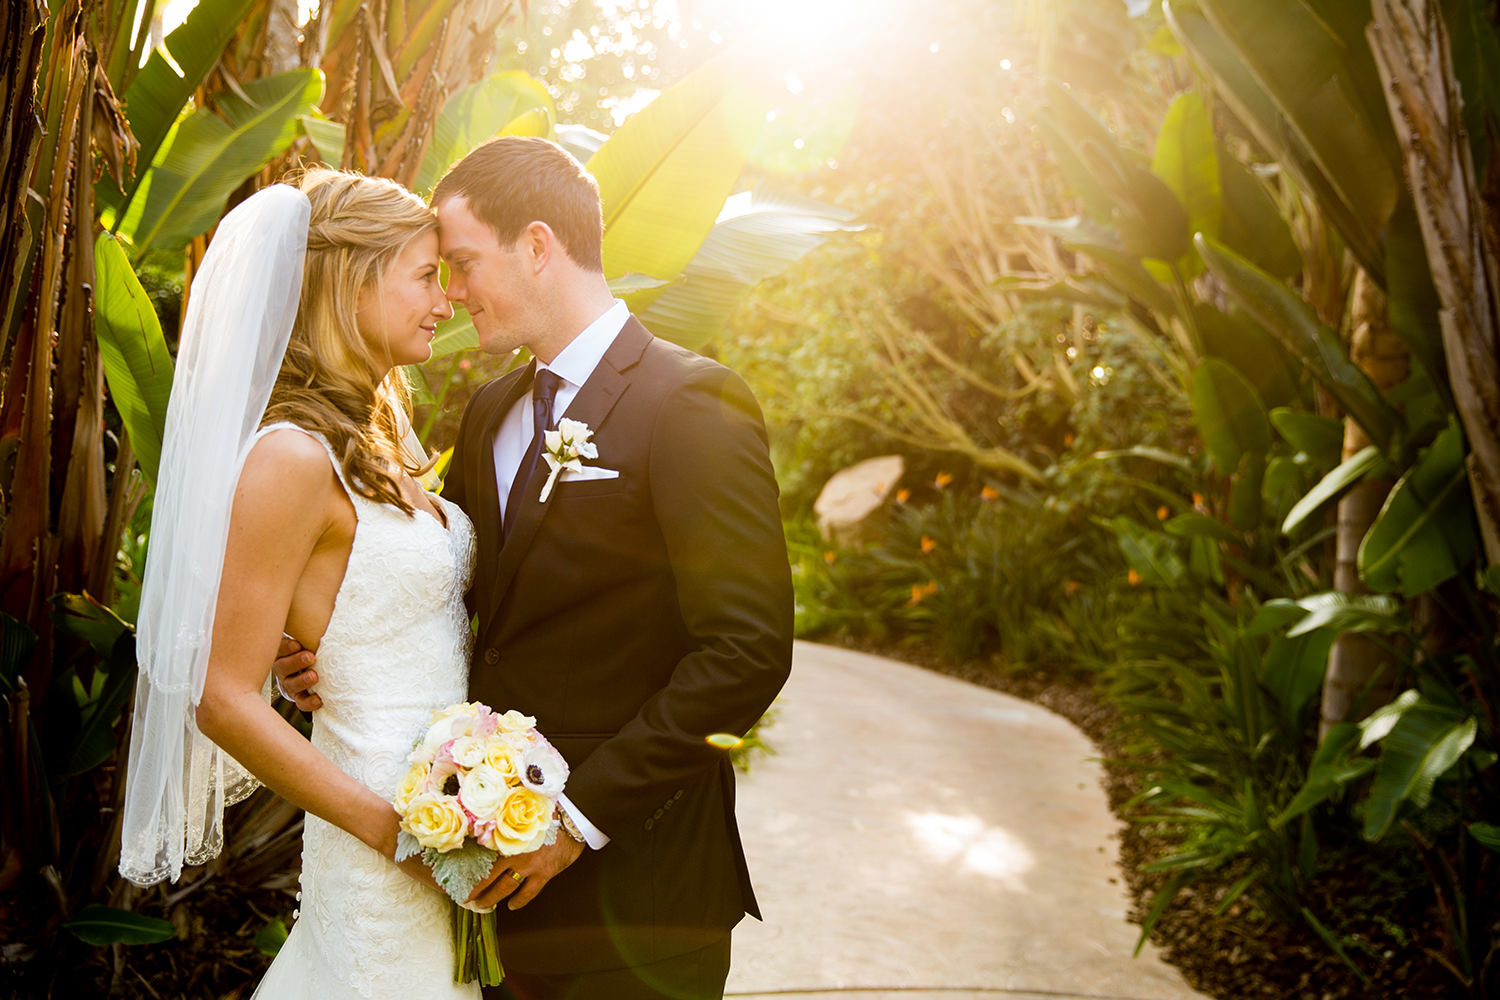 Beautiful wedding portrait with lens flare